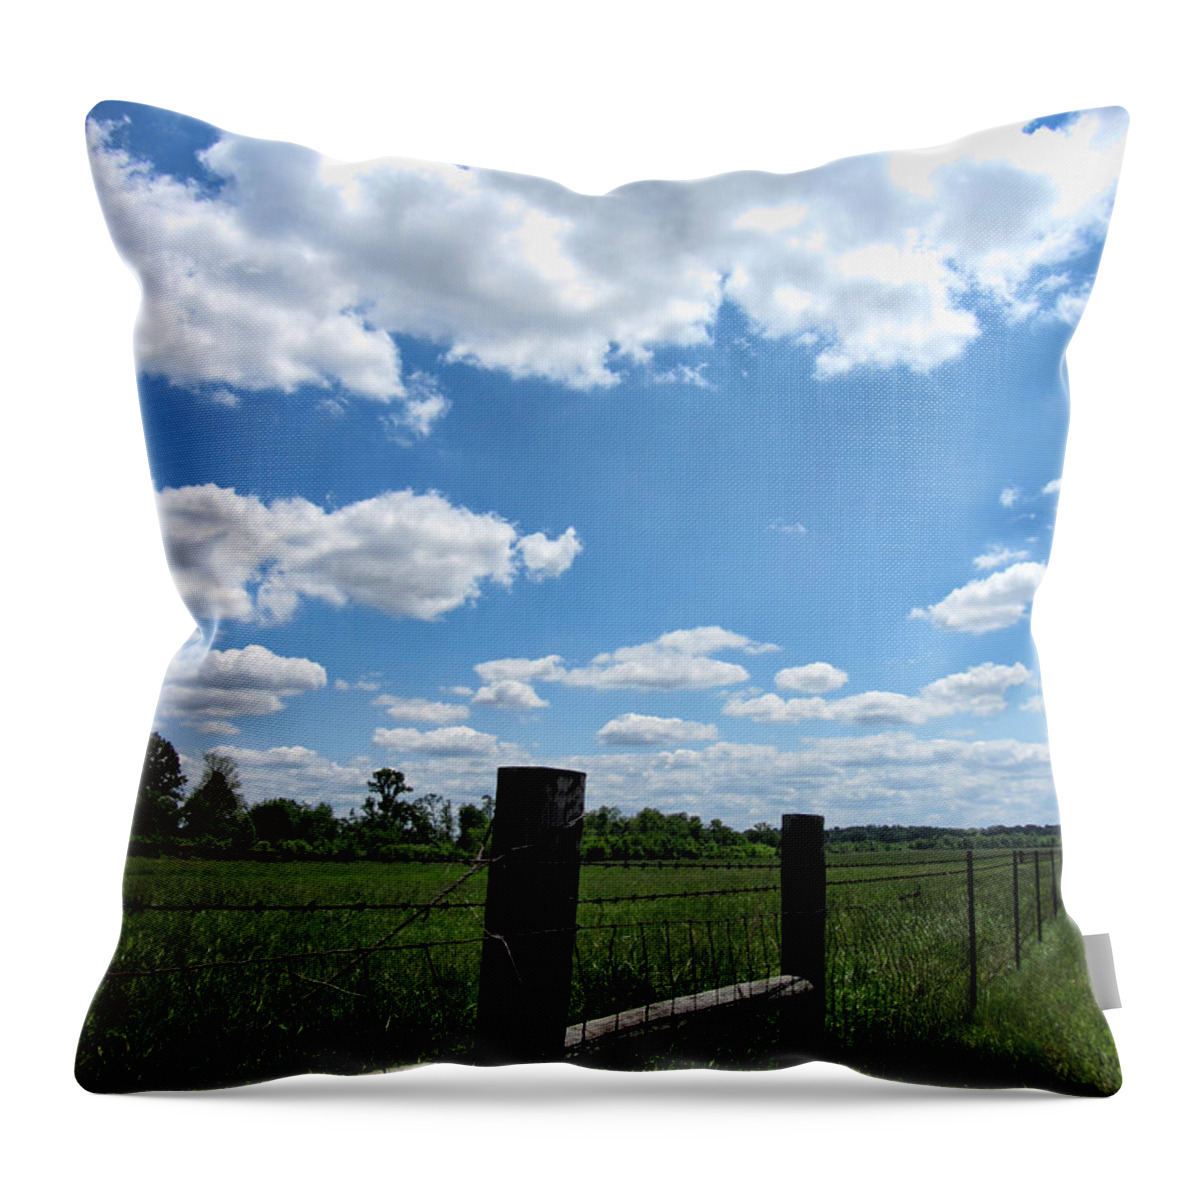 Alabama Throw Pillow featuring the photograph Alabama Down Home by Kathy Clark